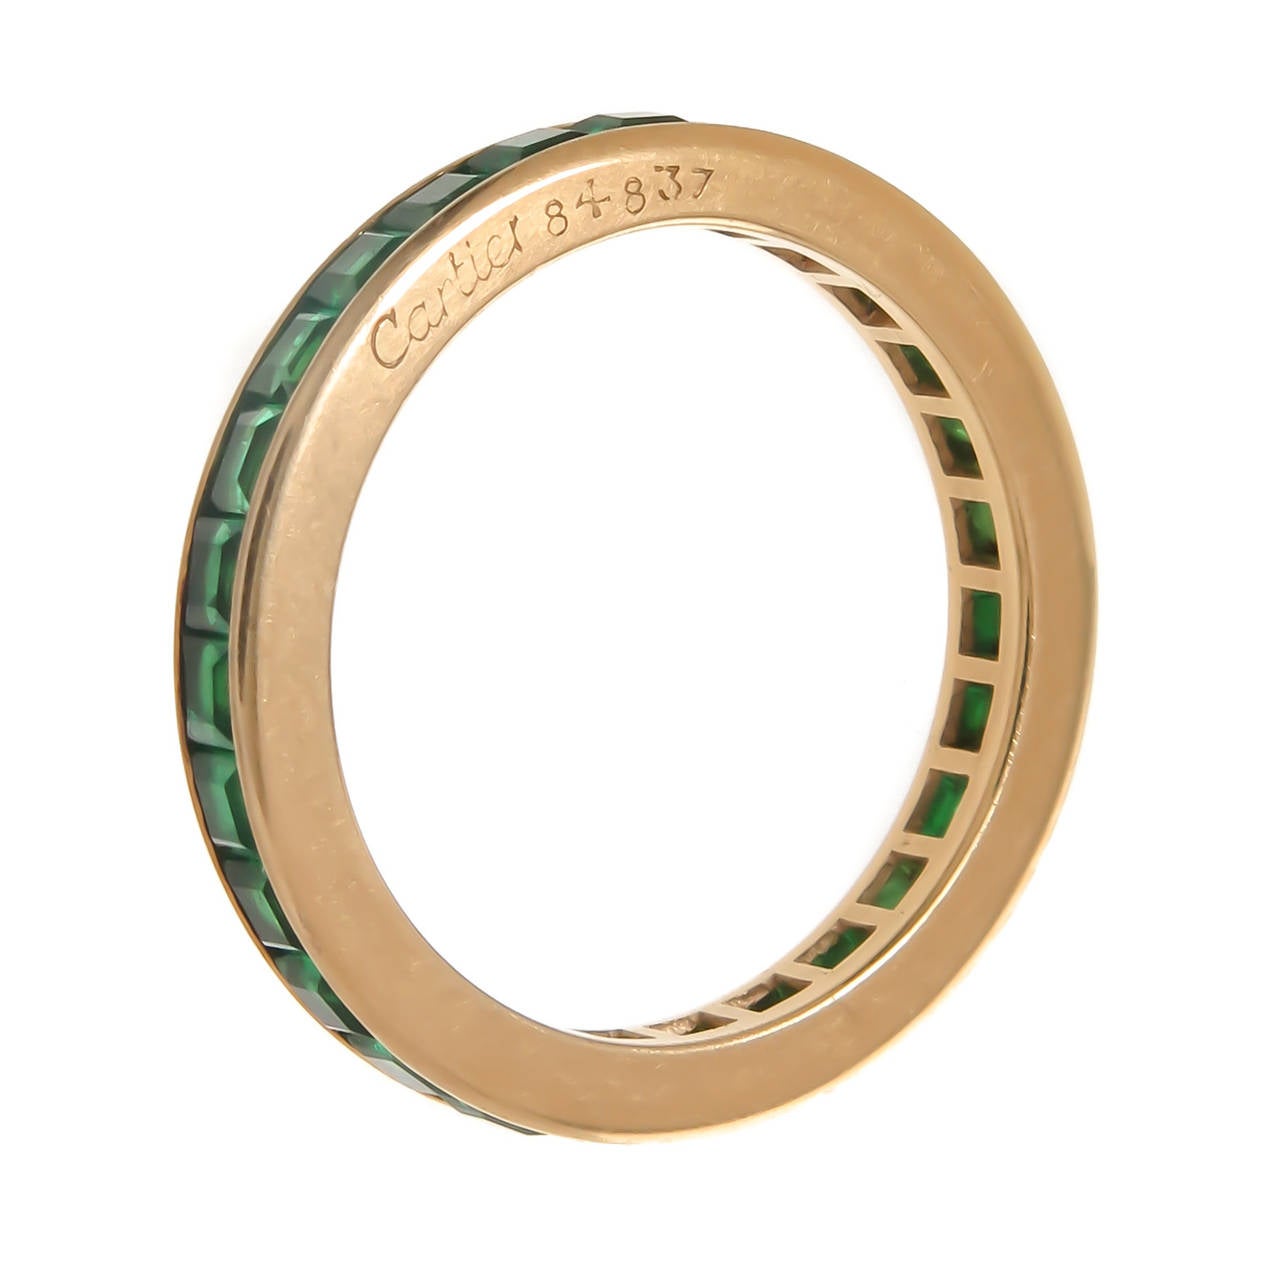 Circa1980s Cartier 18K Yellow Gold and Square cut Emeralds eternity band ring, Measuring 2.5 MM wide, the Emeralds are of very fine Deep Rich Colombian Color. Signed, Numbered and in the original Cartier Presentation box. Finger size = 5 1/2